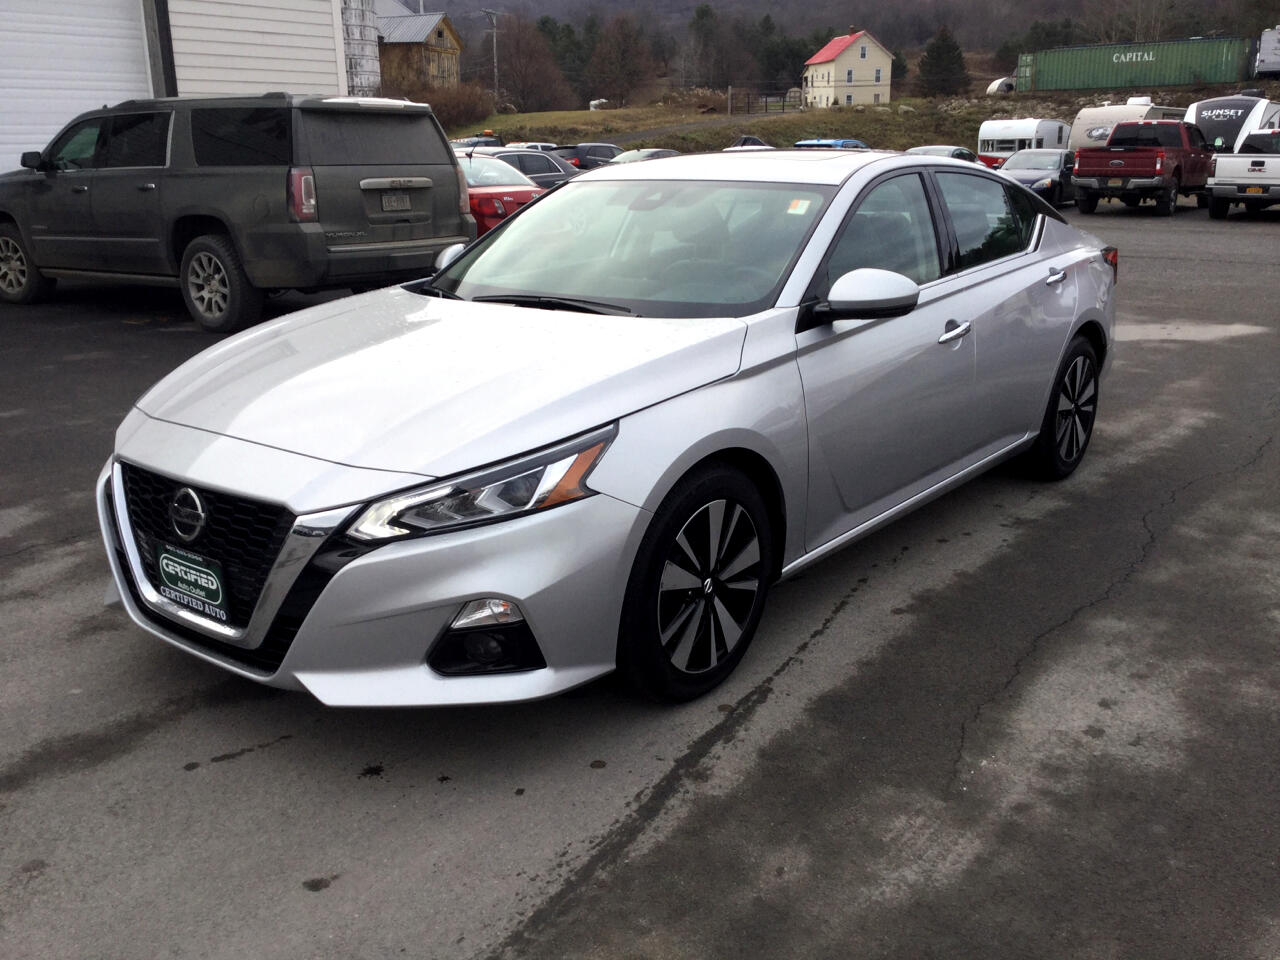 Used 2019 Nissan Altima 2 5 Sl For Sale In Oneonta Ny 13820